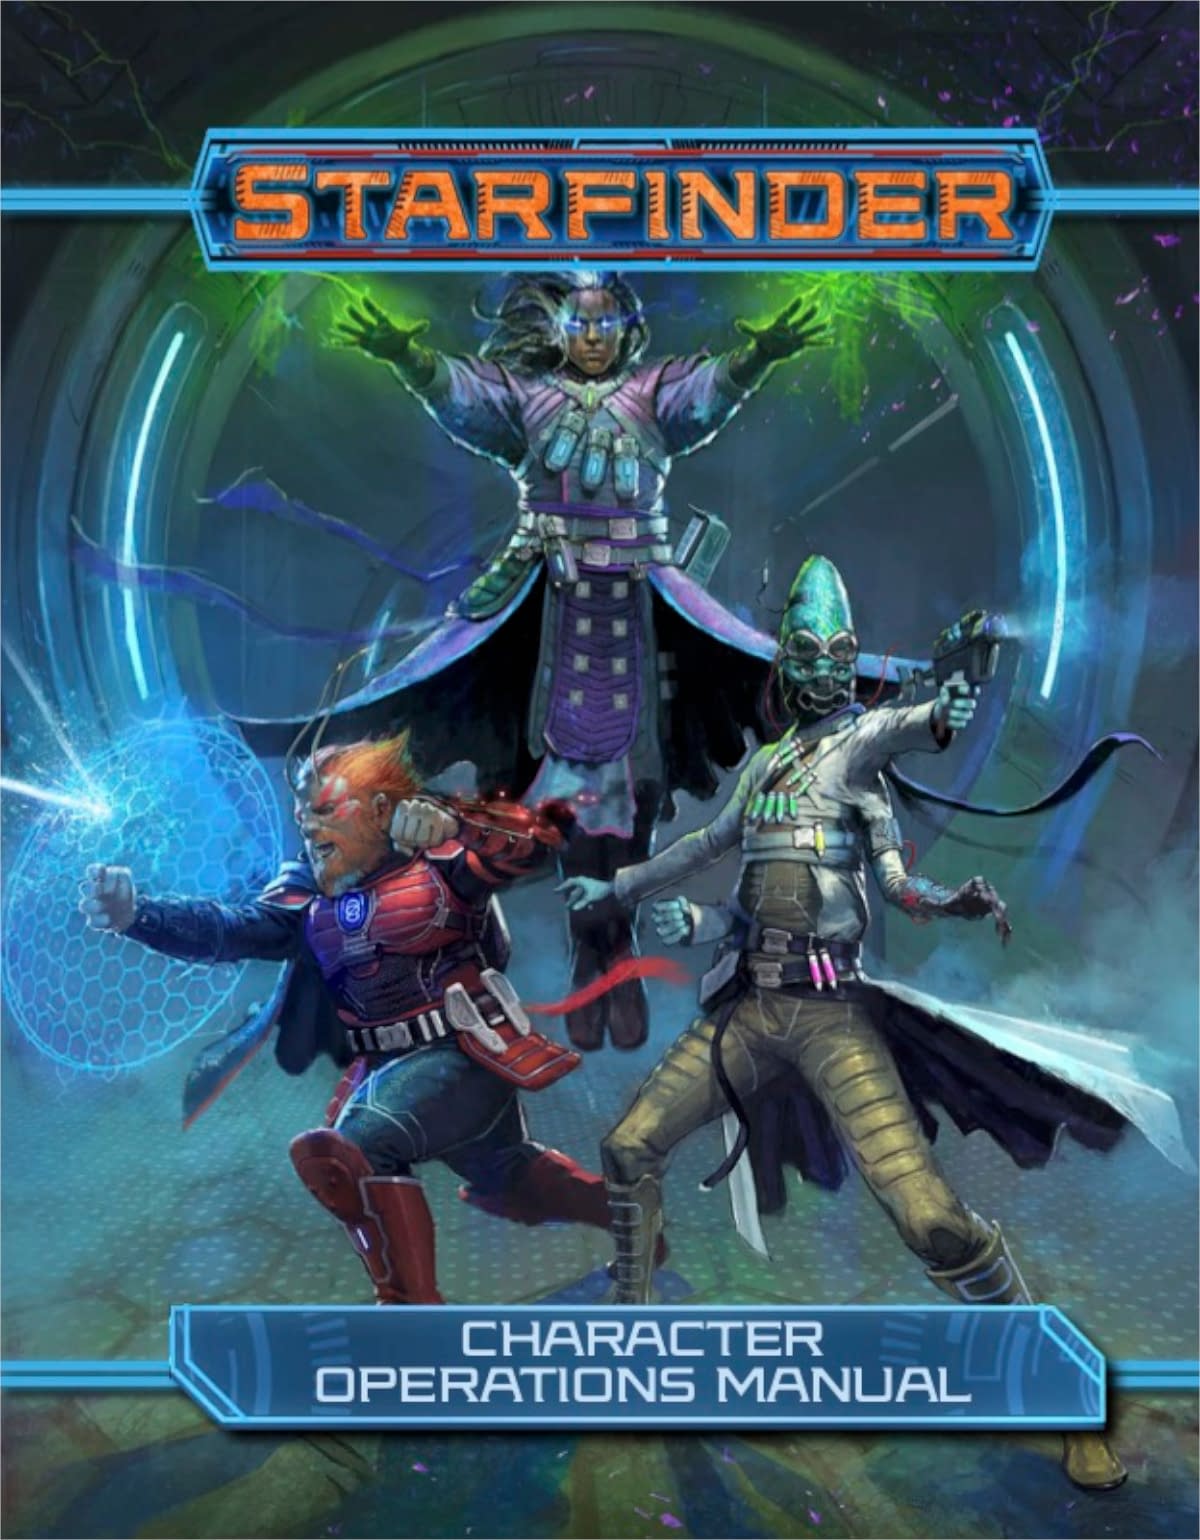 "Starfinder Character Operations Manual" Brings New Classes